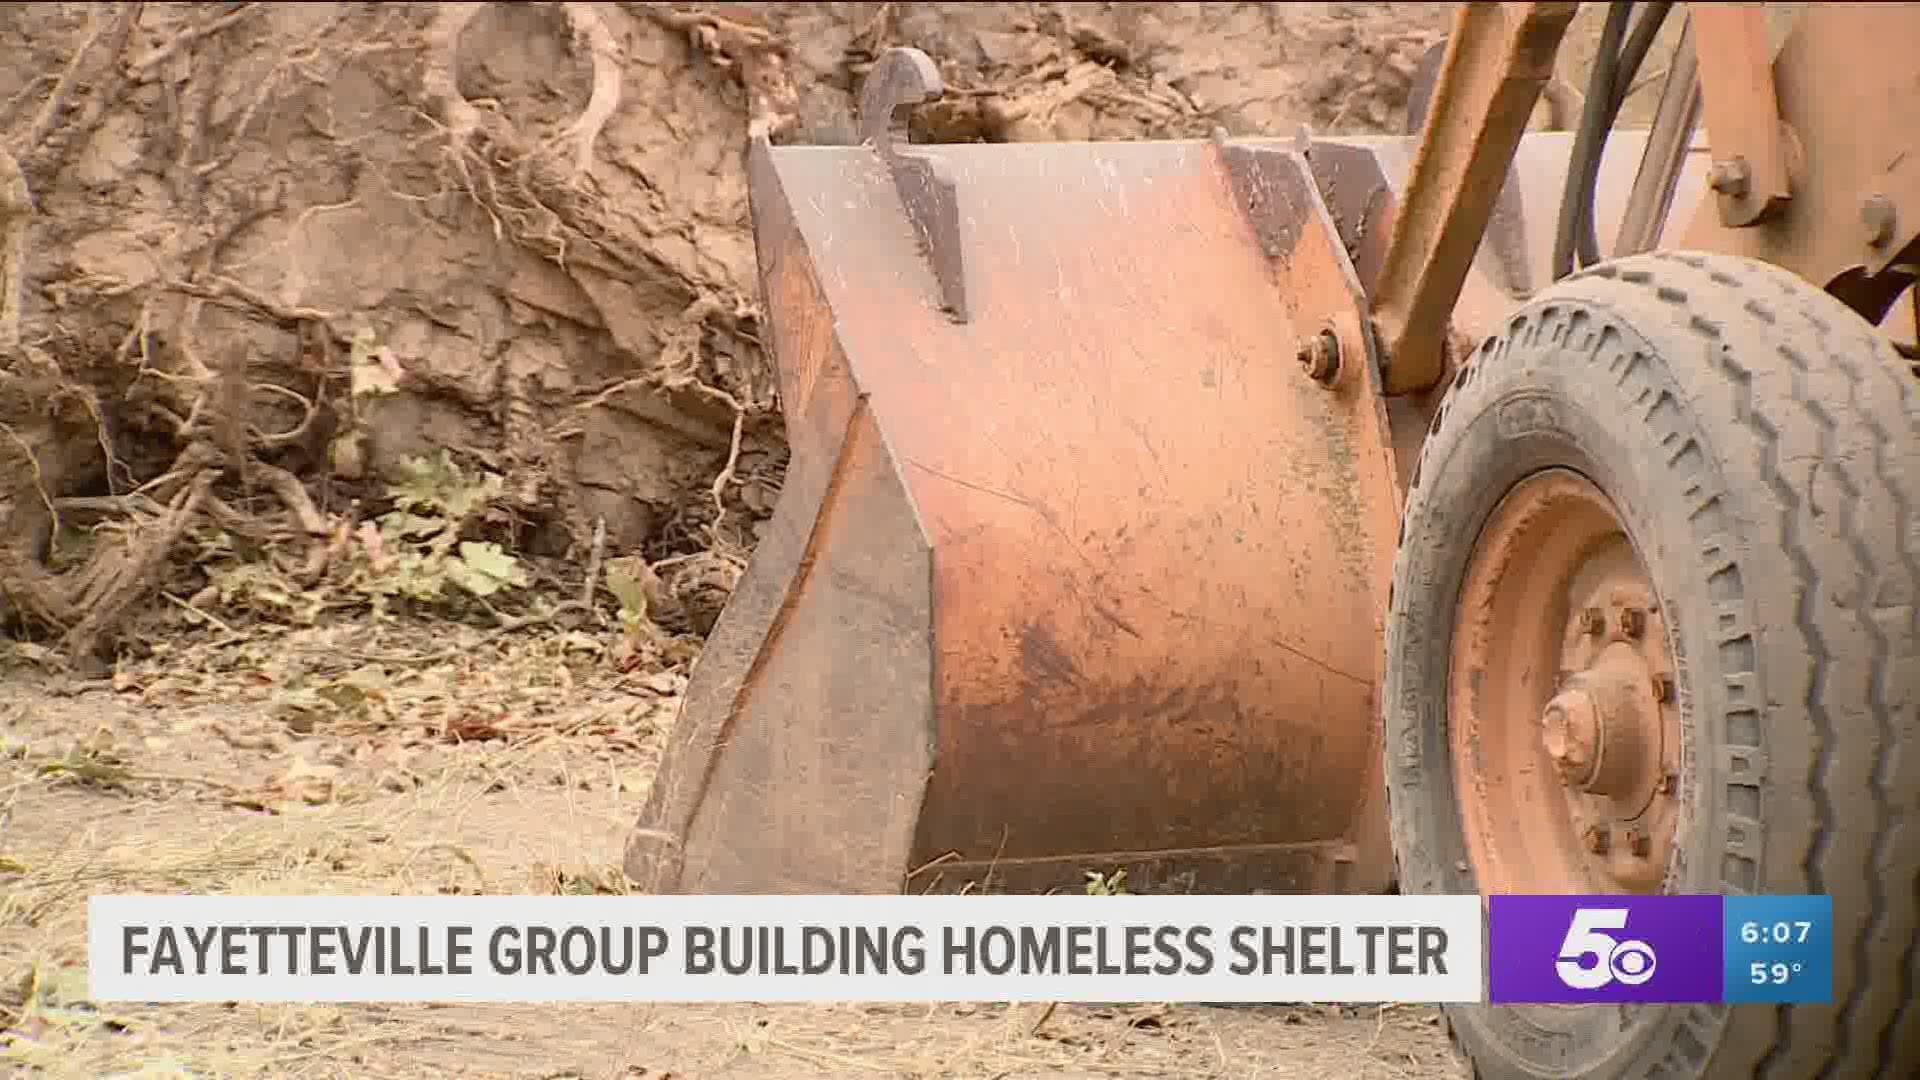 New Beginnings of NWA is on a mission to end homelessness in the region.